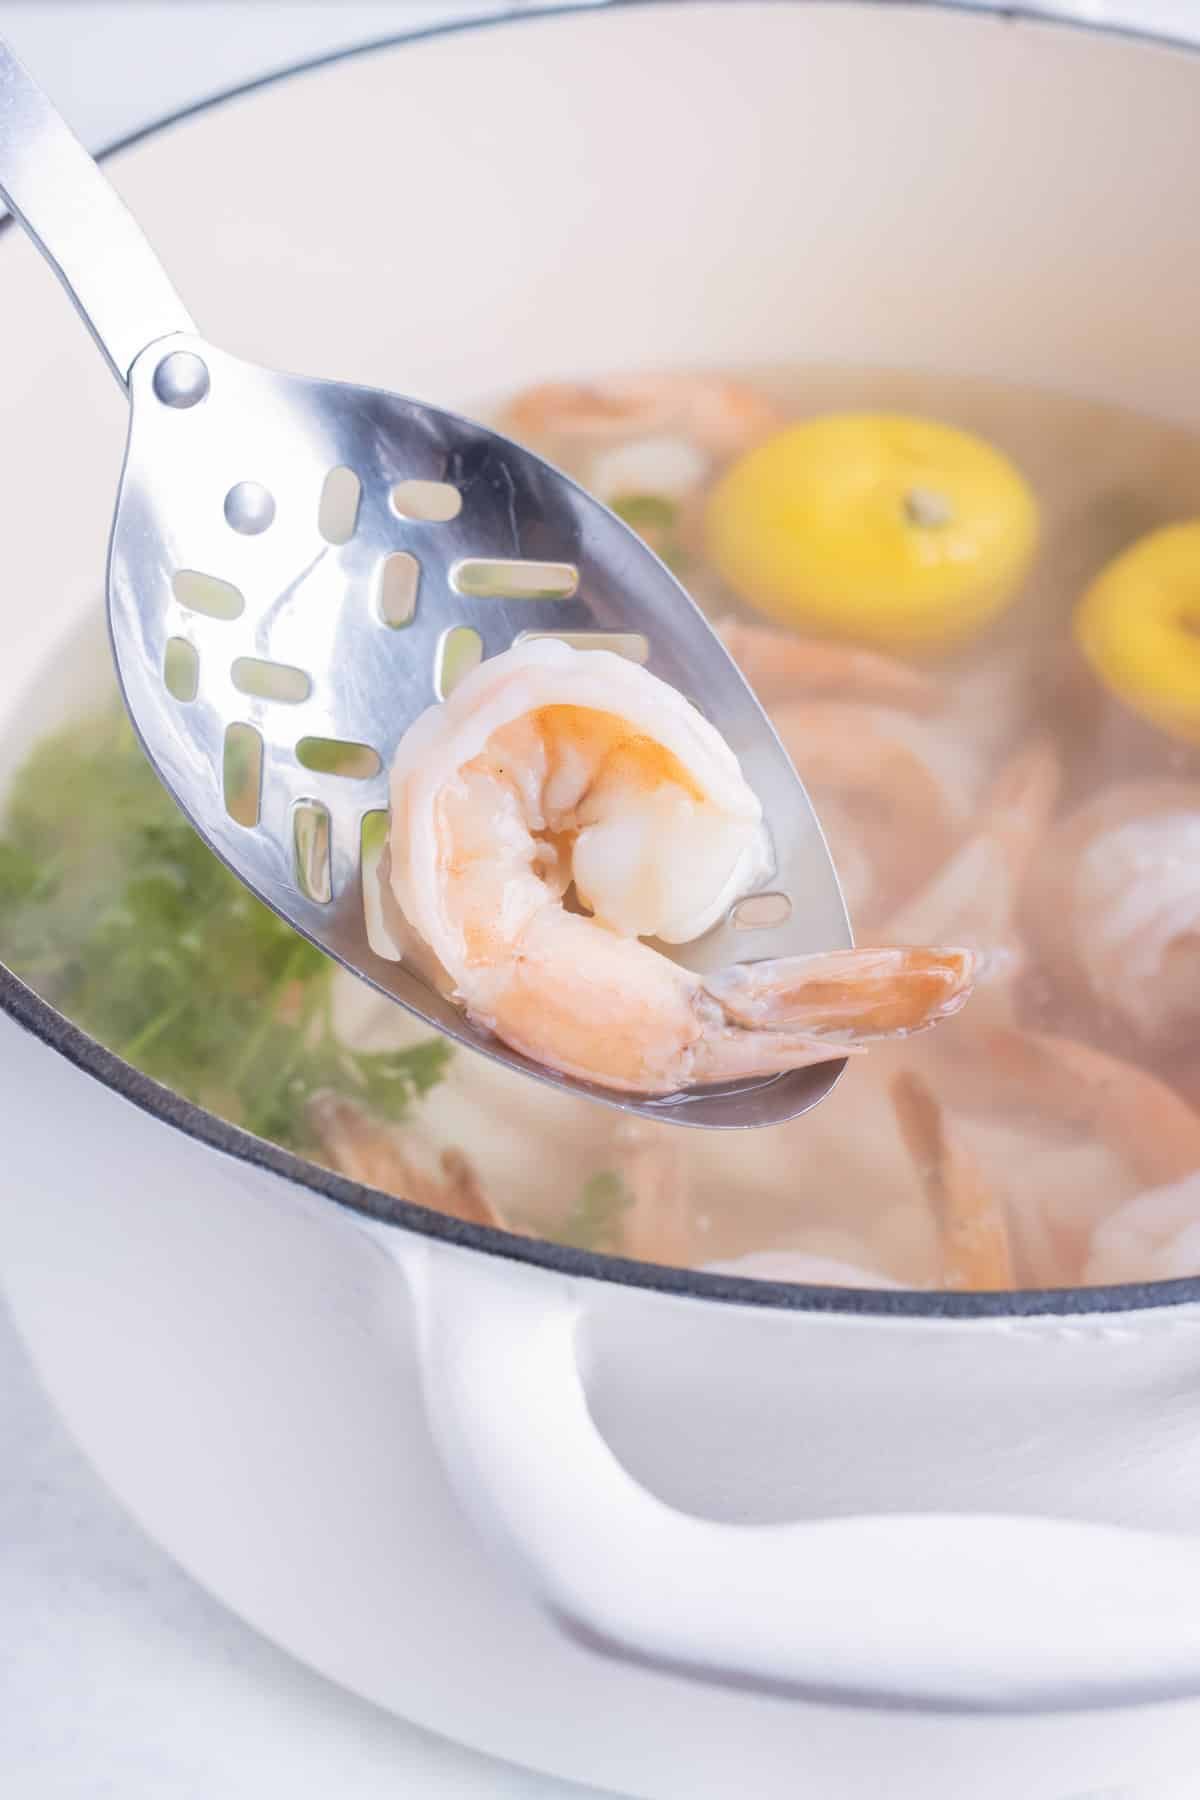 The shrimp is cooked until pink in the water and lemon mixture.